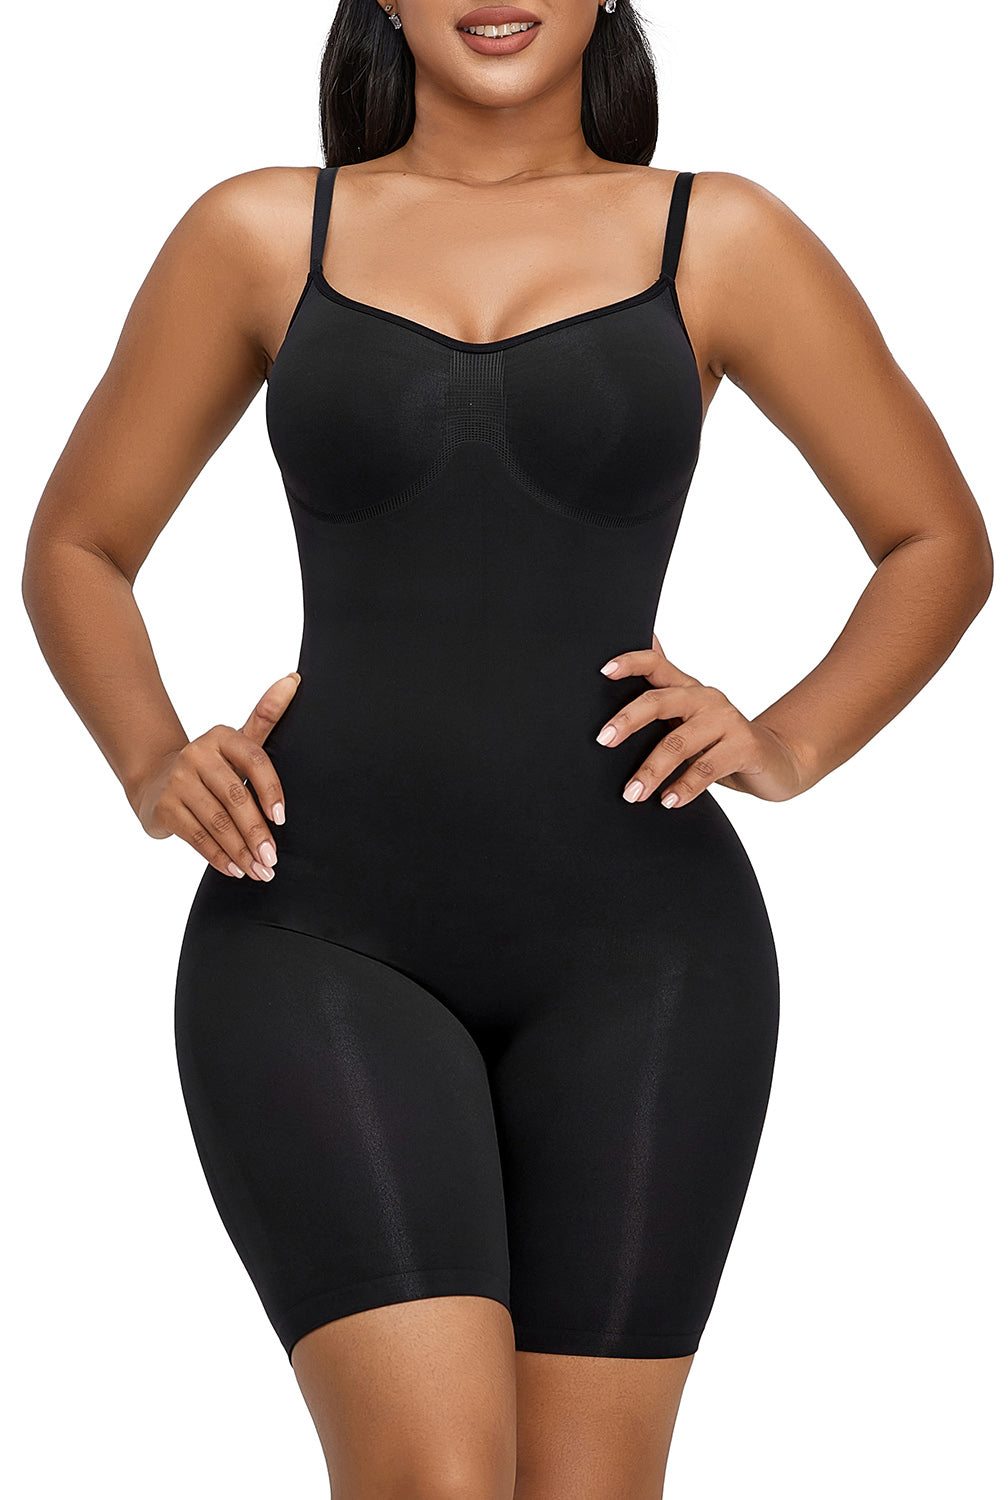 2019 Slimming Tank Tops for Women Tummy Control Shaper with Built